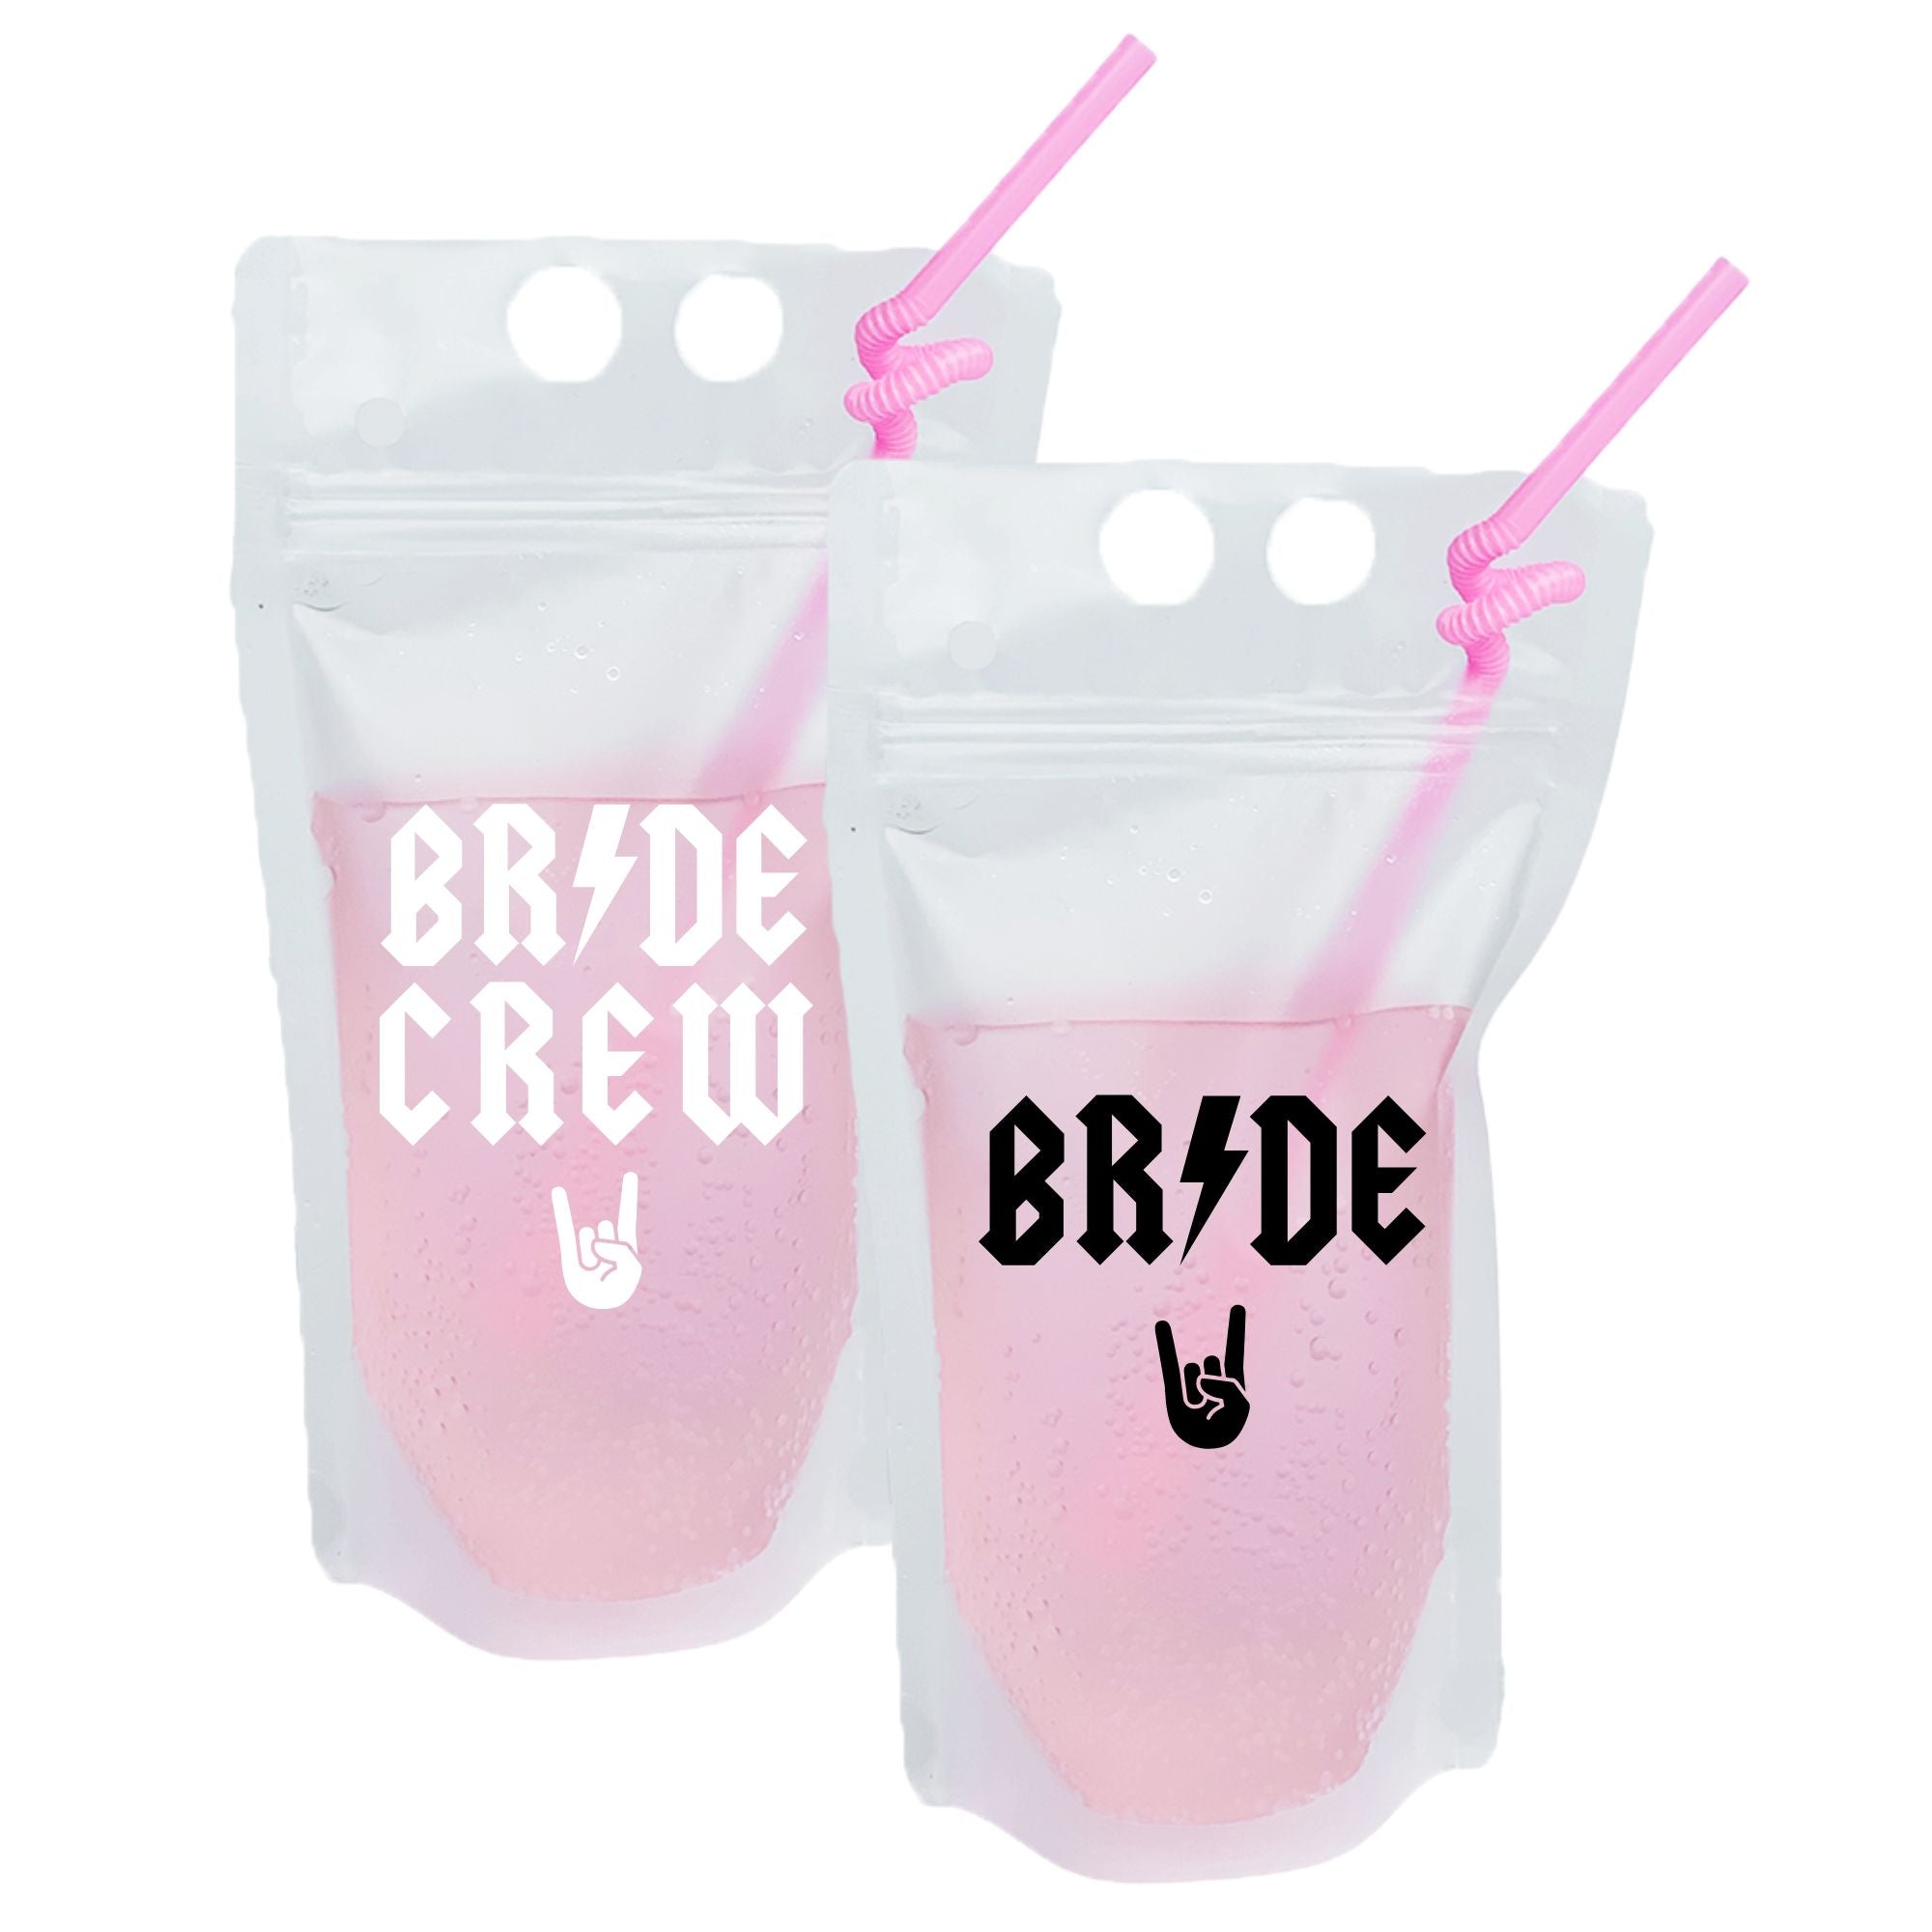 Bride / Bride Crew Party Pouch - Sprinkled With Pink #bachelorette #custom #gifts